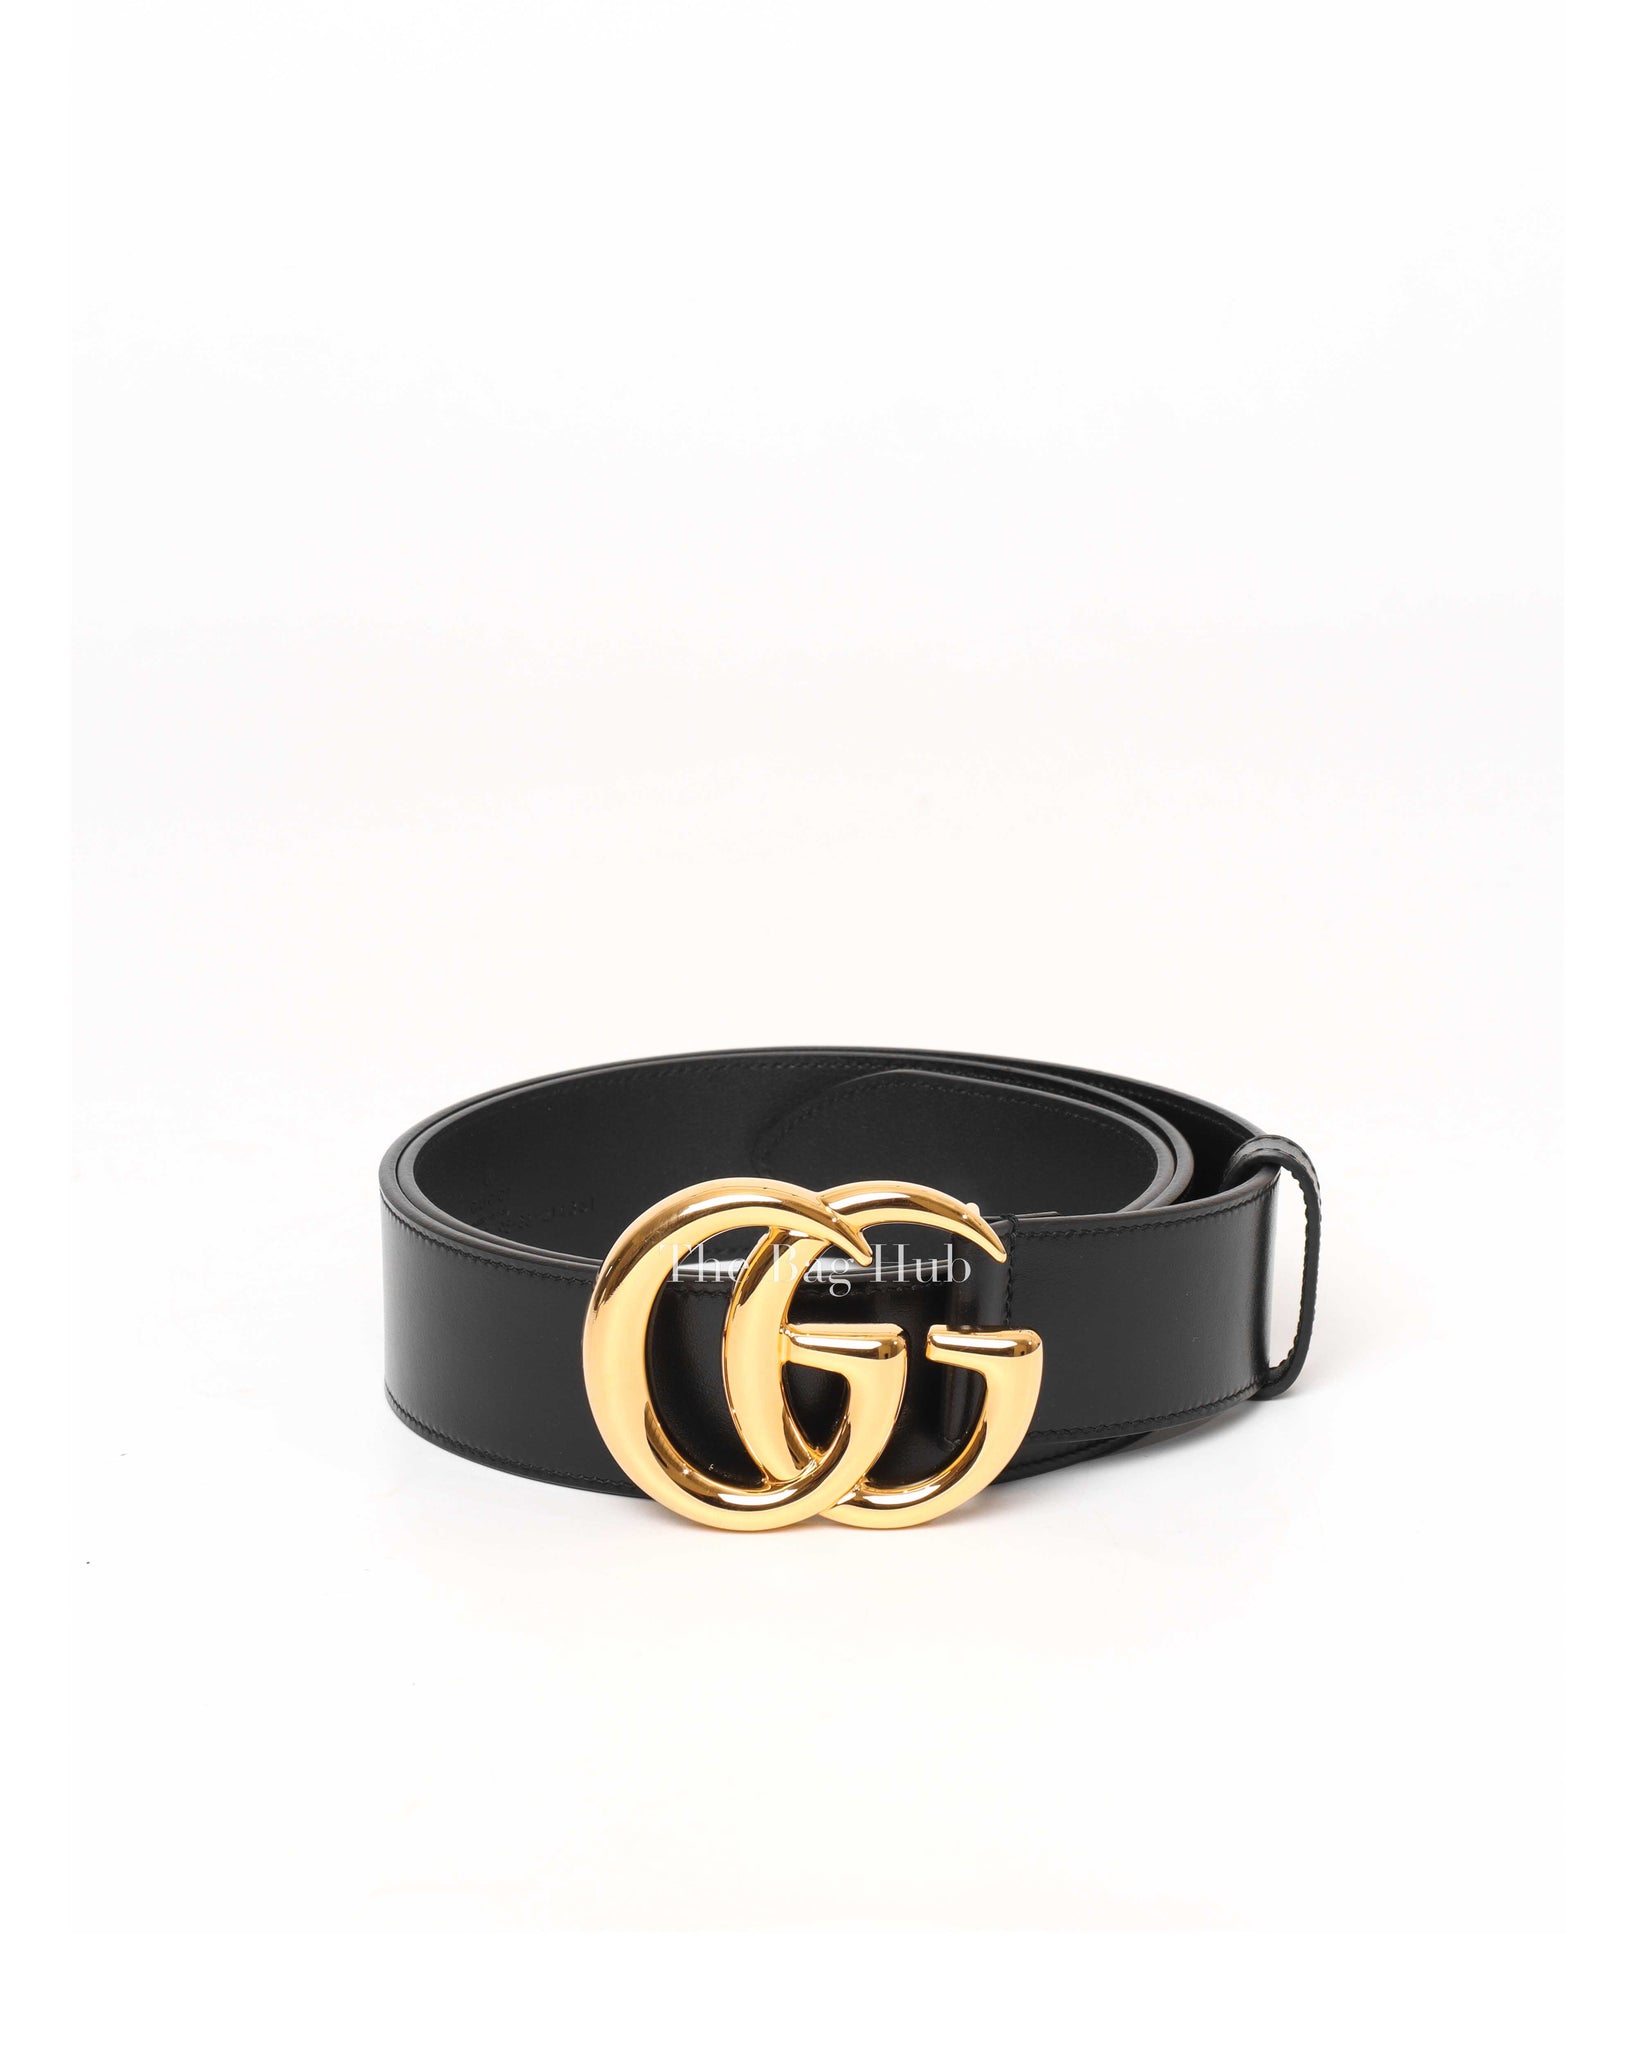 Gucci Black Leather GG Marmont Shiny Buckle Belt 95/38-3